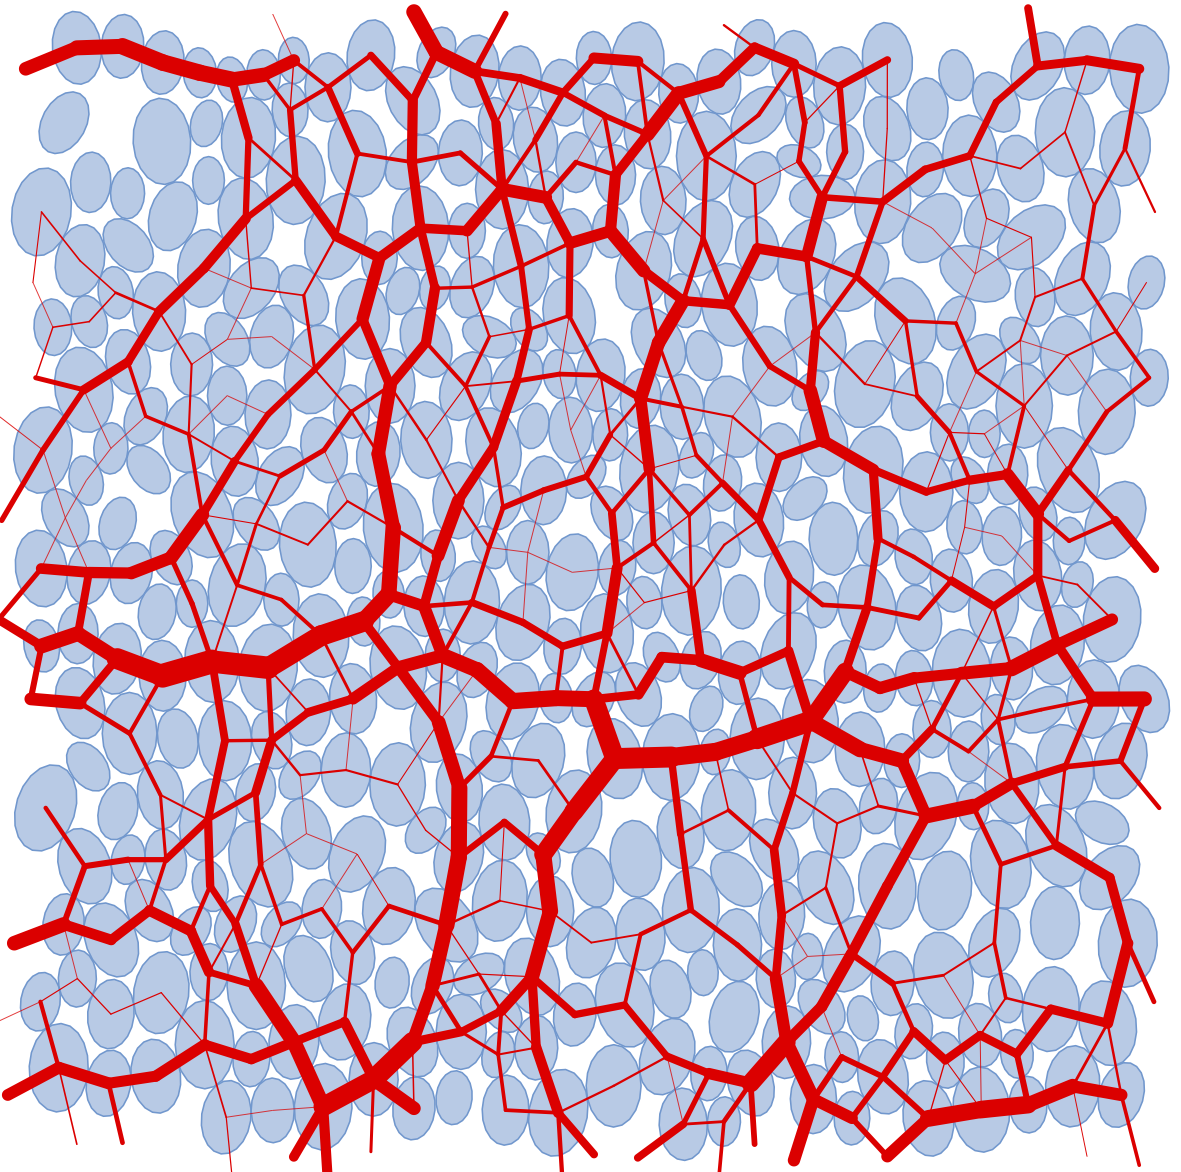 Particles and contact force chains dumped by
<em>drawSVG</em>.